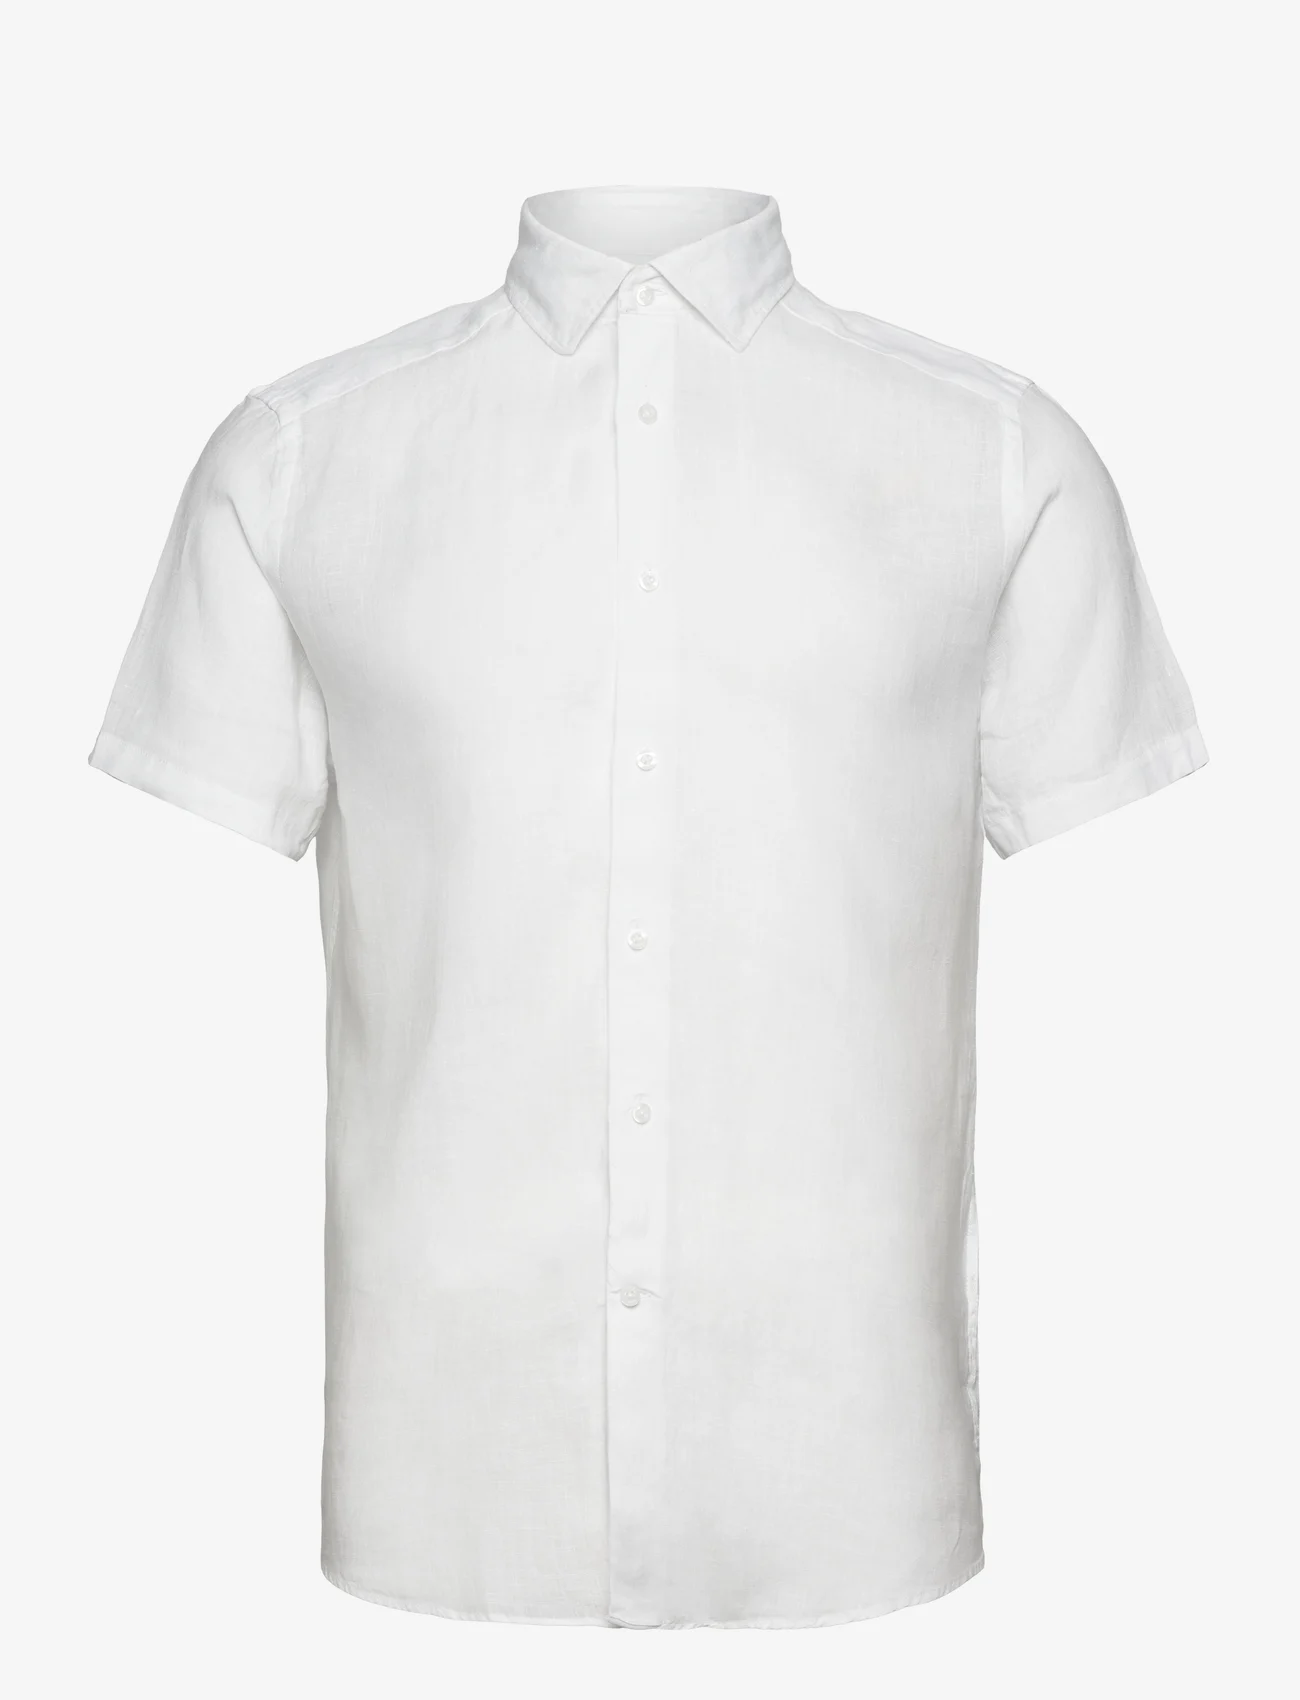 Reiss - HOLIDAY - linen shirts - white - 0